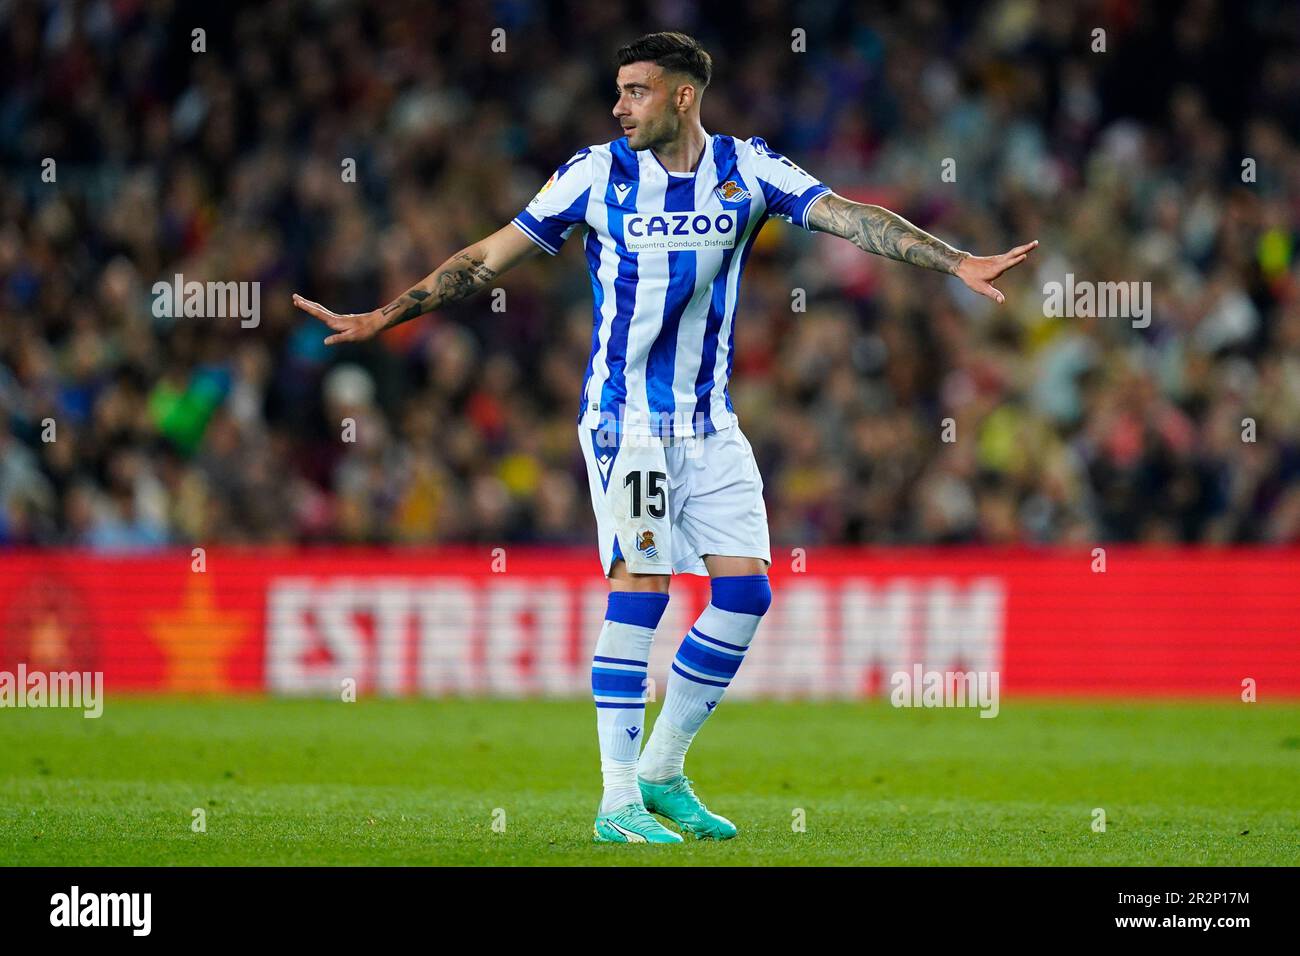 Barcelona, Spain. 20th May, 2023. Diego Rico of Real Sociedad during the La Liga match between FC Barcelona and Real Sociedad played at Spotify Camp Nou Stadium on May 20, 2023 in Barcelona, Spain. (Photo by Sergio Ruiz/PRESSIN) Credit: PRESSINPHOTO SPORTS AGENCY/Alamy Live News Stock Photo